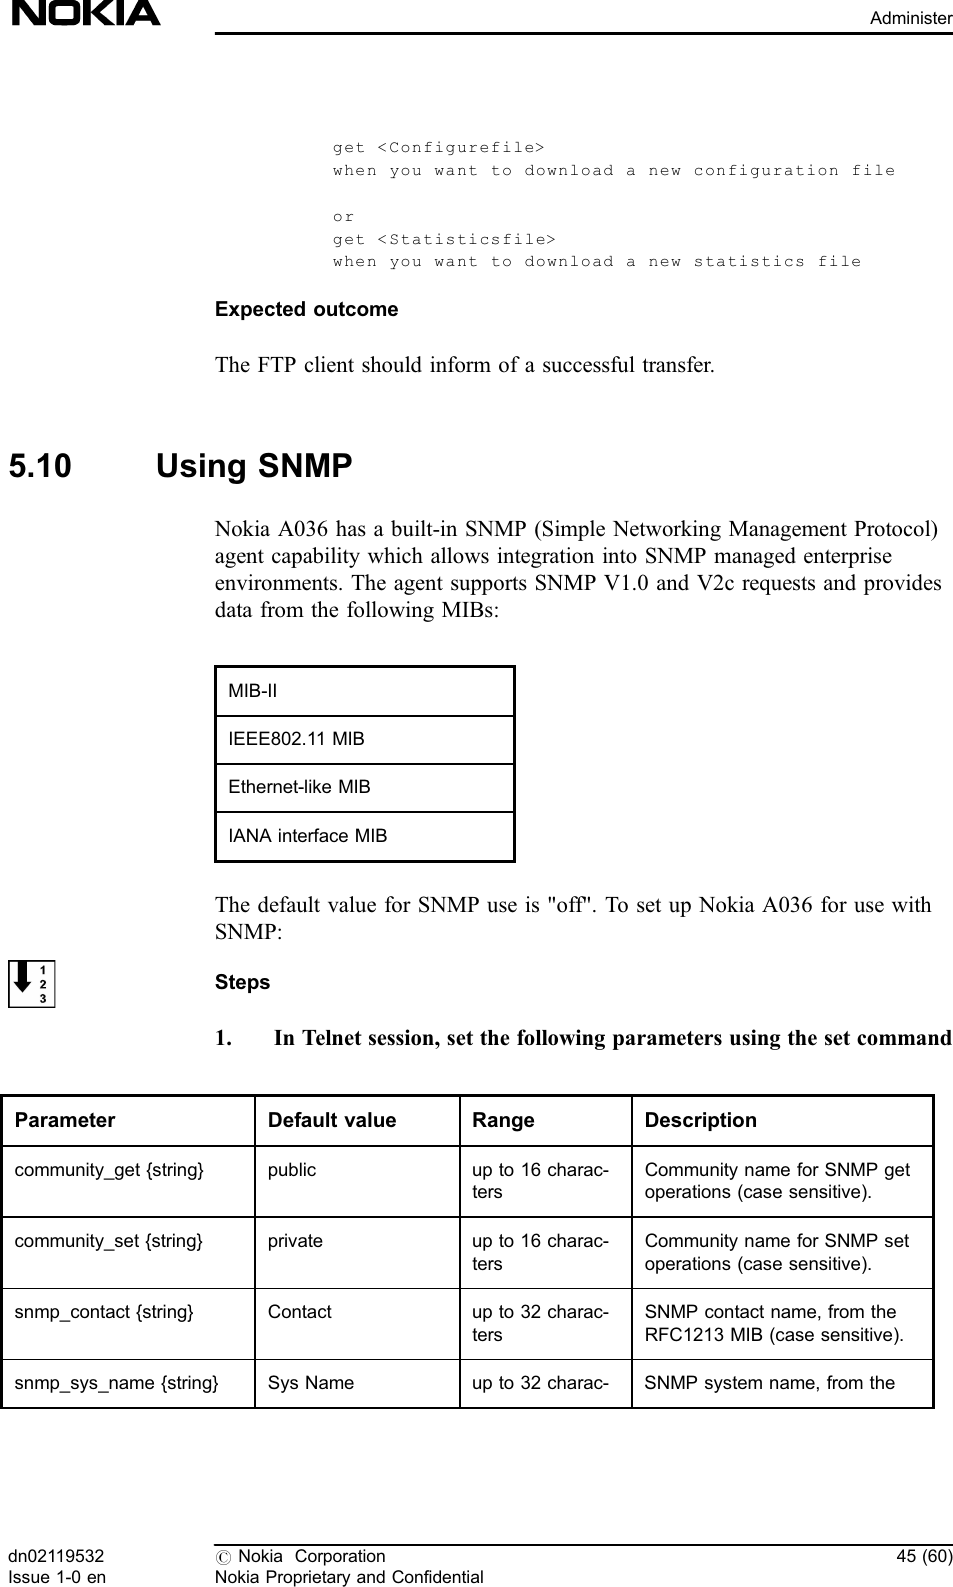 get &lt;Configurefile&gt;when you want to download a new configuration fileorget &lt;Statisticsfile&gt;when you want to download a new statistics fileExpected outcomeThe FTP client should inform of a successful transfer.5.10 Using SNMPNokia A036 has a built-in SNMP (Simple Networking Management Protocol)agent capability which allows integration into SNMP managed enterpriseenvironments. The agent supports SNMP V1.0 and V2c requests and providesdata from the following MIBs:MIB-IIIEEE802.11 MIBEthernet-like MIBIANA interface MIBThe default value for SNMP use is &quot;off&quot;. To set up Nokia A036 for use withSNMP:Steps1. In Telnet session, set the following parameters using the set commandParameter Default value Range Descriptioncommunity_get {string} public up to 16 charac-tersCommunity name for SNMP getoperations (case sensitive).community_set {string} private up to 16 charac-tersCommunity name for SNMP setoperations (case sensitive).snmp_contact {string} Contact up to 32 charac-tersSNMP contact name, from theRFC1213 MIB (case sensitive).snmp_sys_name {string} Sys Name up to 32 charac- SNMP system name, from thedn02119532Issue 1-0 en#Nokia CorporationNokia Proprietary and Confidential45 (60)Administer